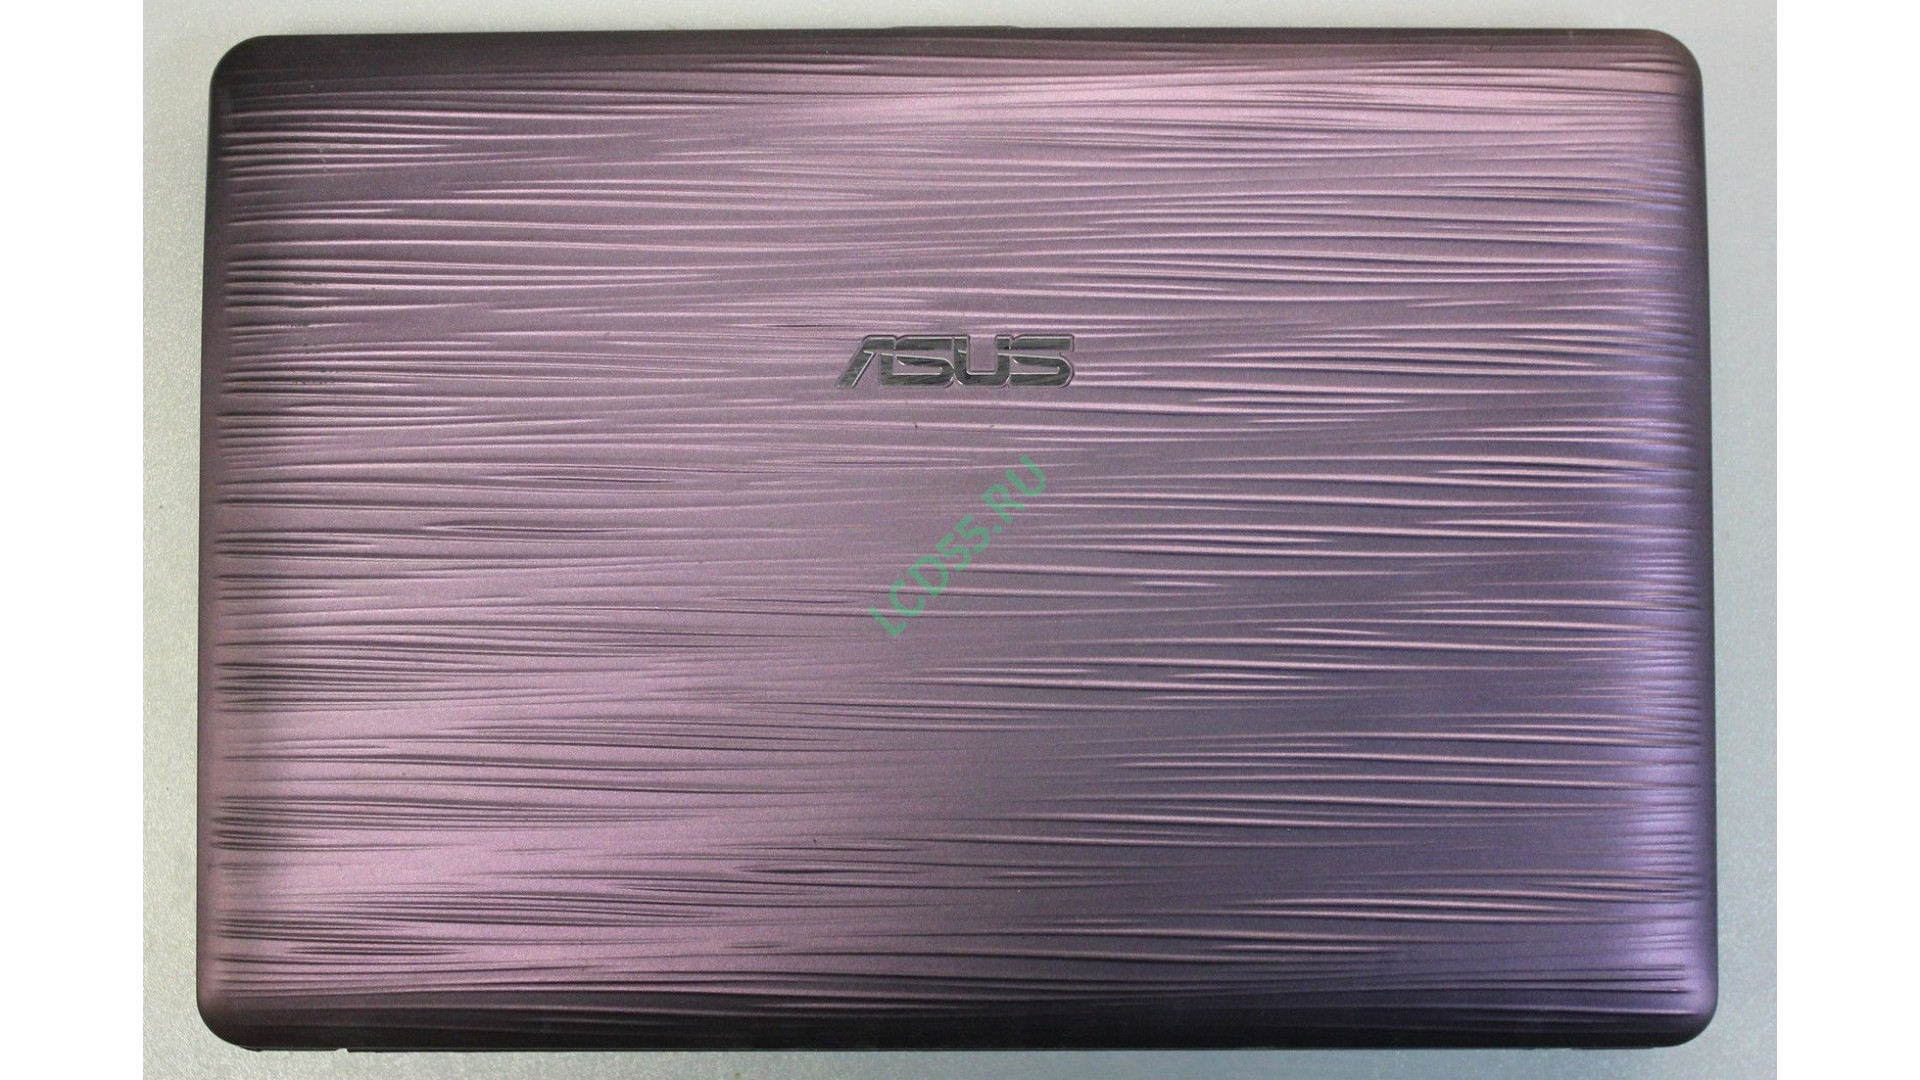 ASUS Eee PC 1015PW-PUR073S